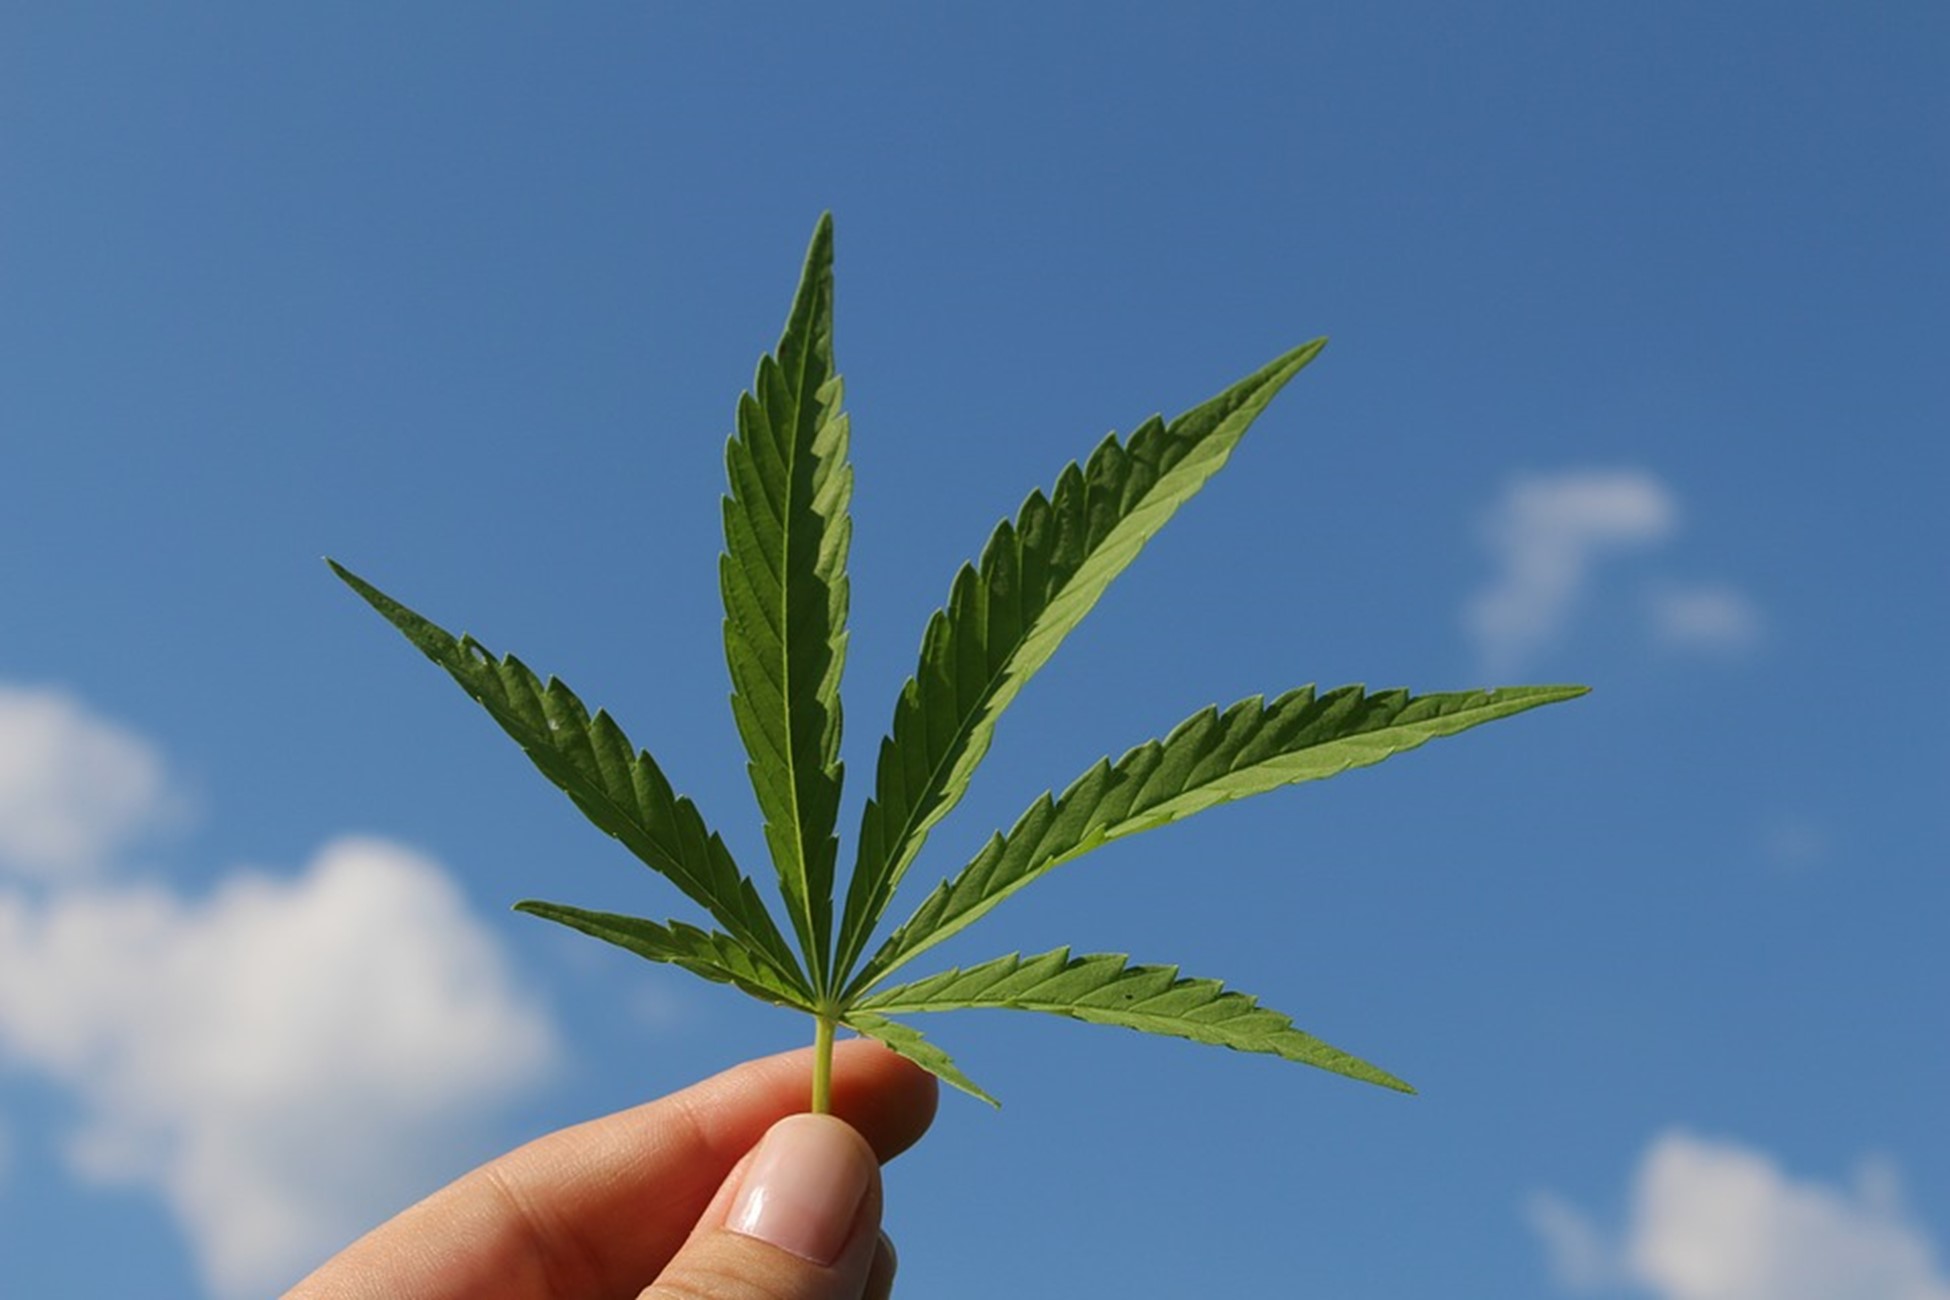 Leaf from a cannabis plant